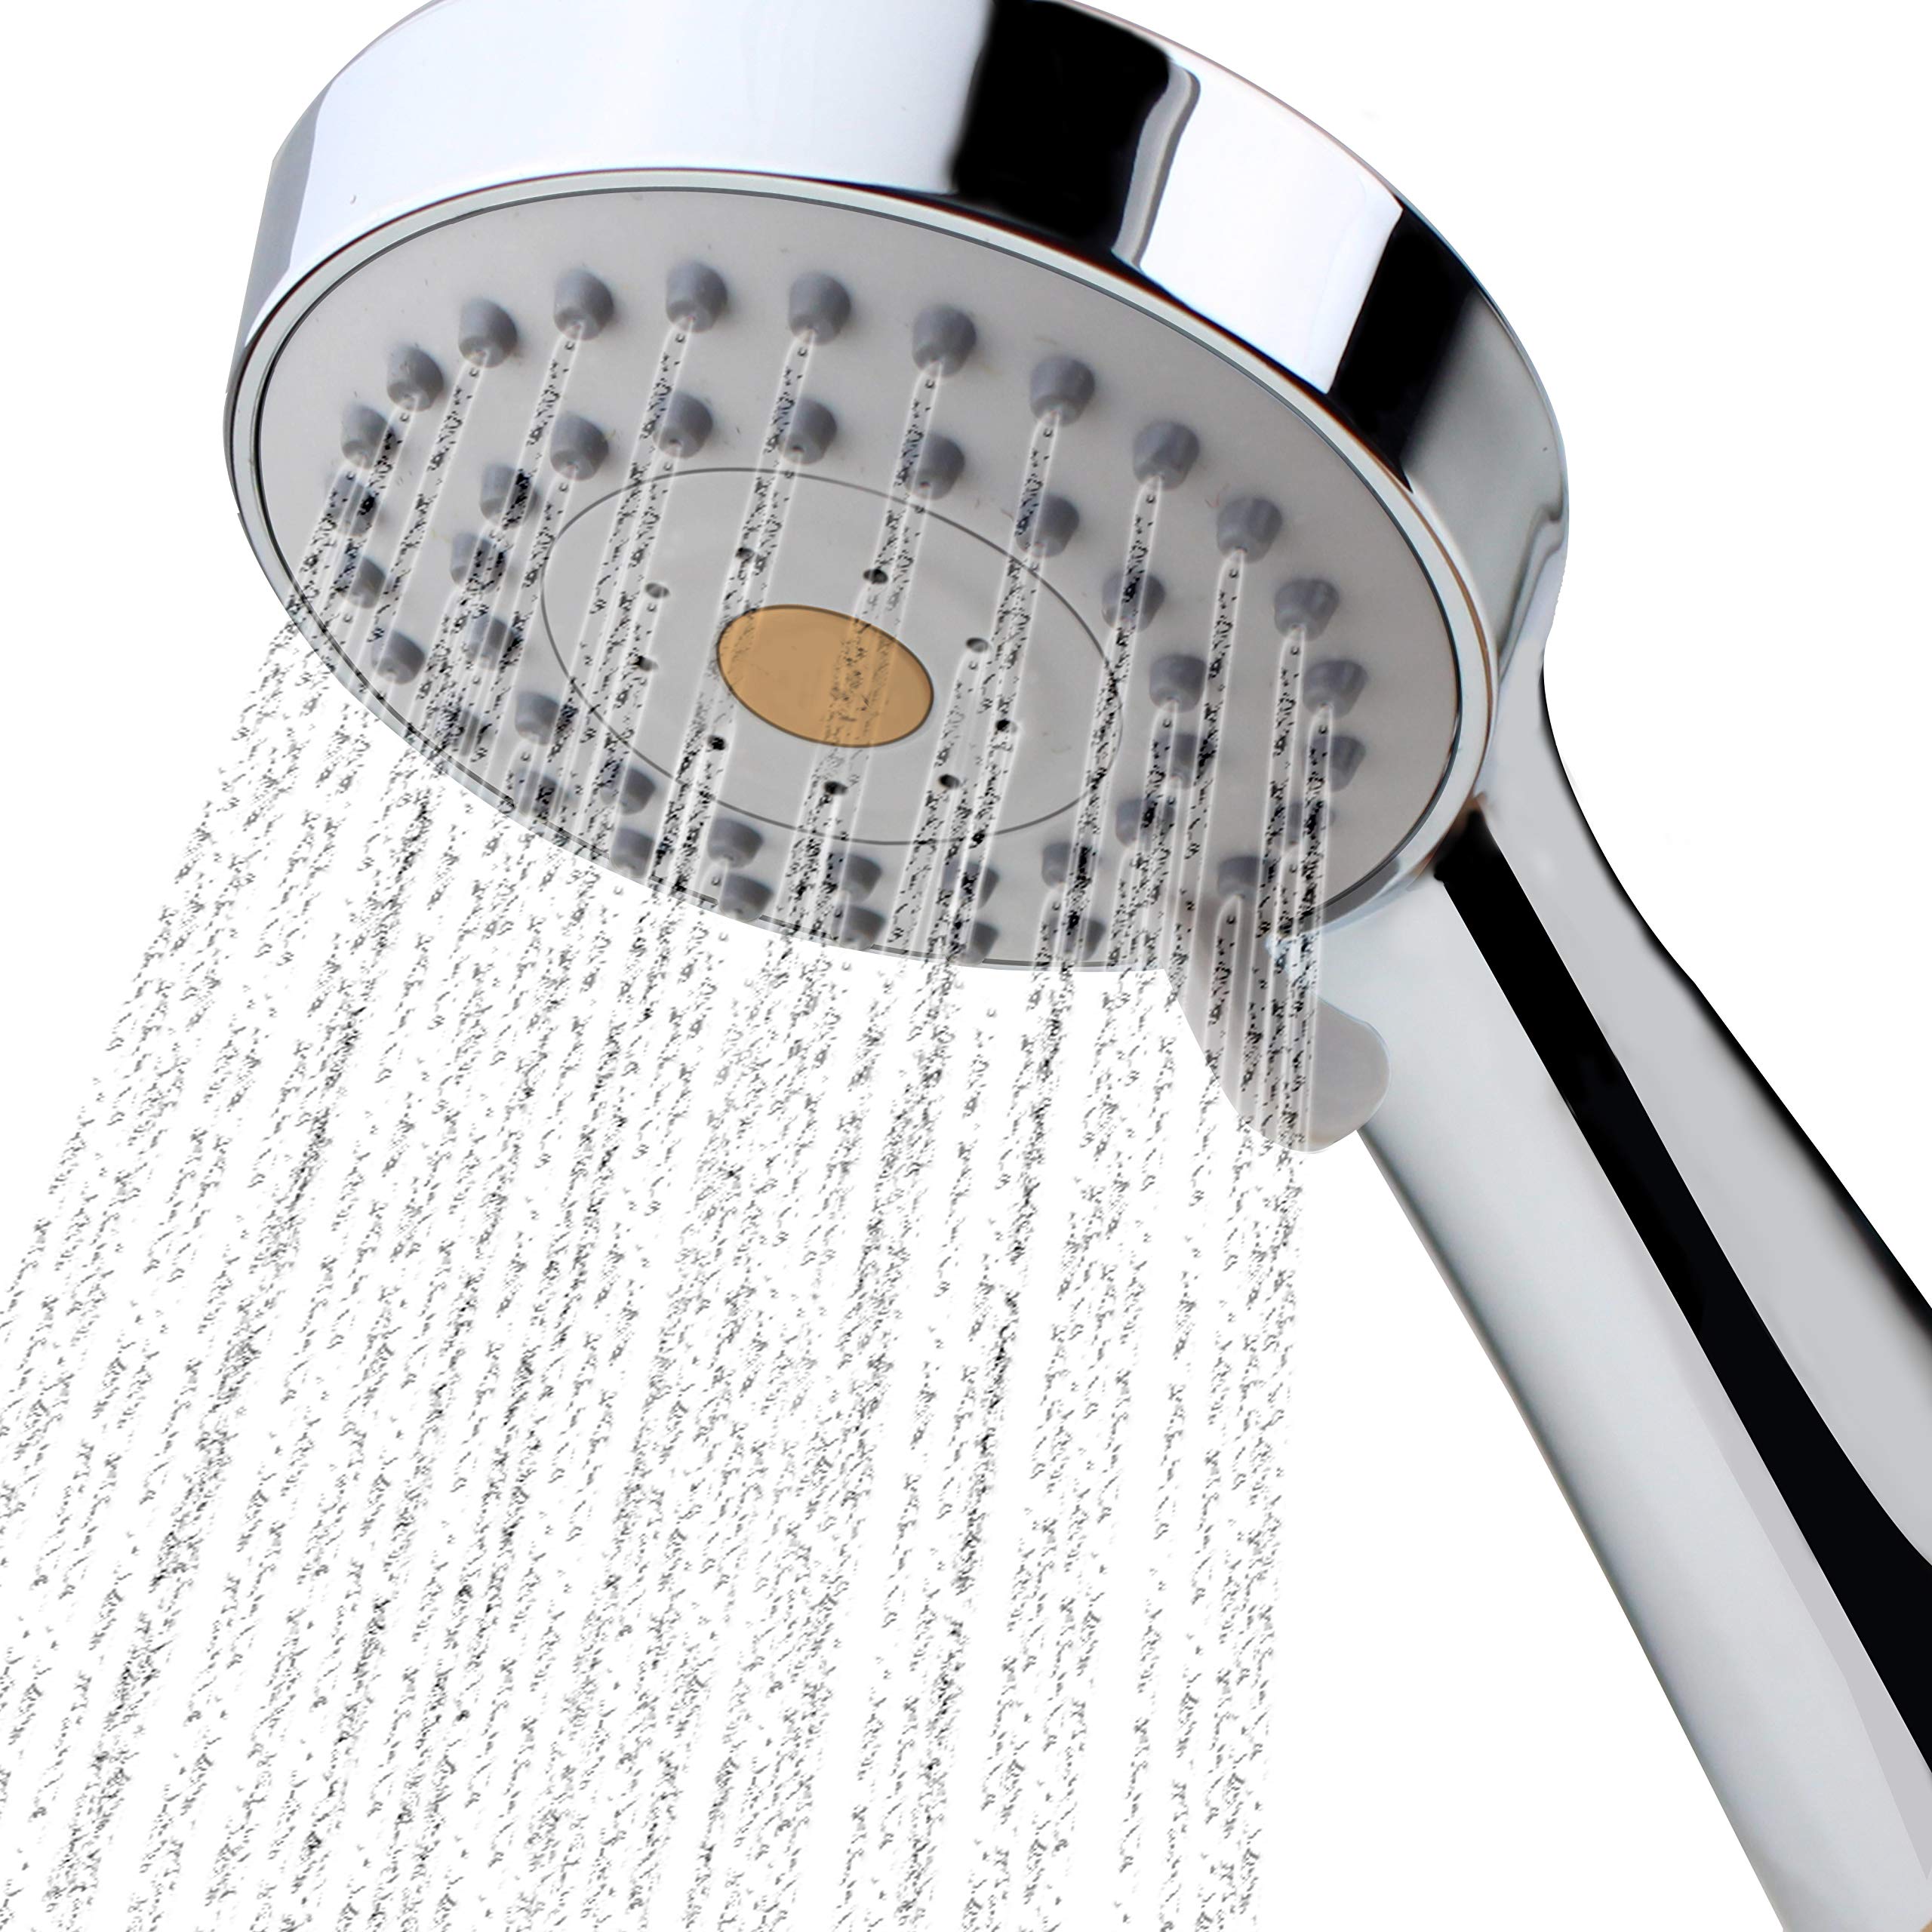 HO2ME High Pressure Handheld Shower Head with Powerful Shower Spray against Low Pressure Water Supply Pipeline, Multi-functions, w/ 79 inch Hose, Bracket, Flow Regulator, Chrome Finish